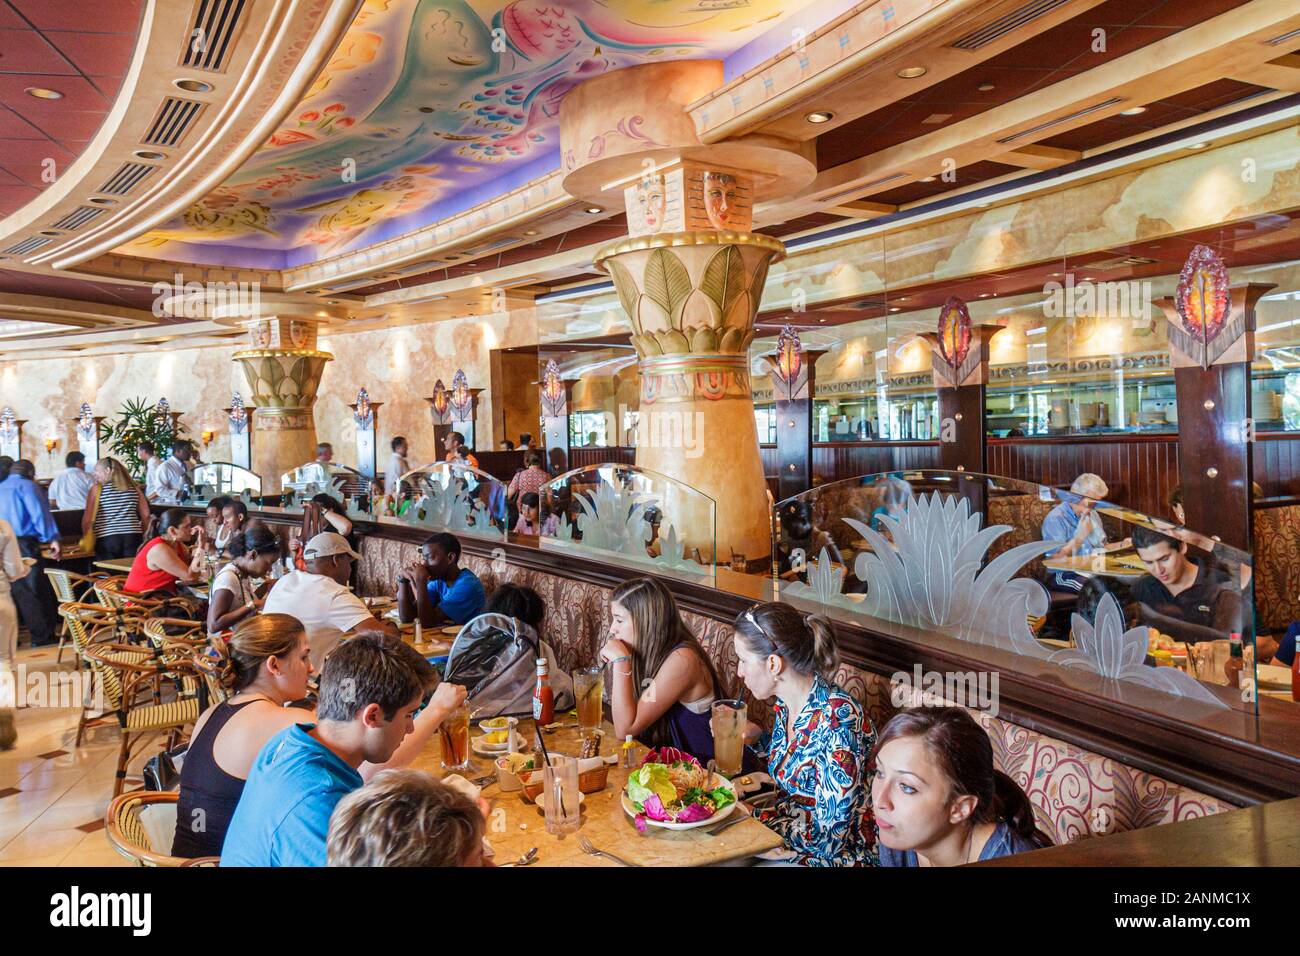 Miami Florida,Aventura,Aventura Mall,Cheesecake Factory,restaurant restaurants food dining eating out cafe cafes bistro,interior inside,tables,diners, Stock Photo